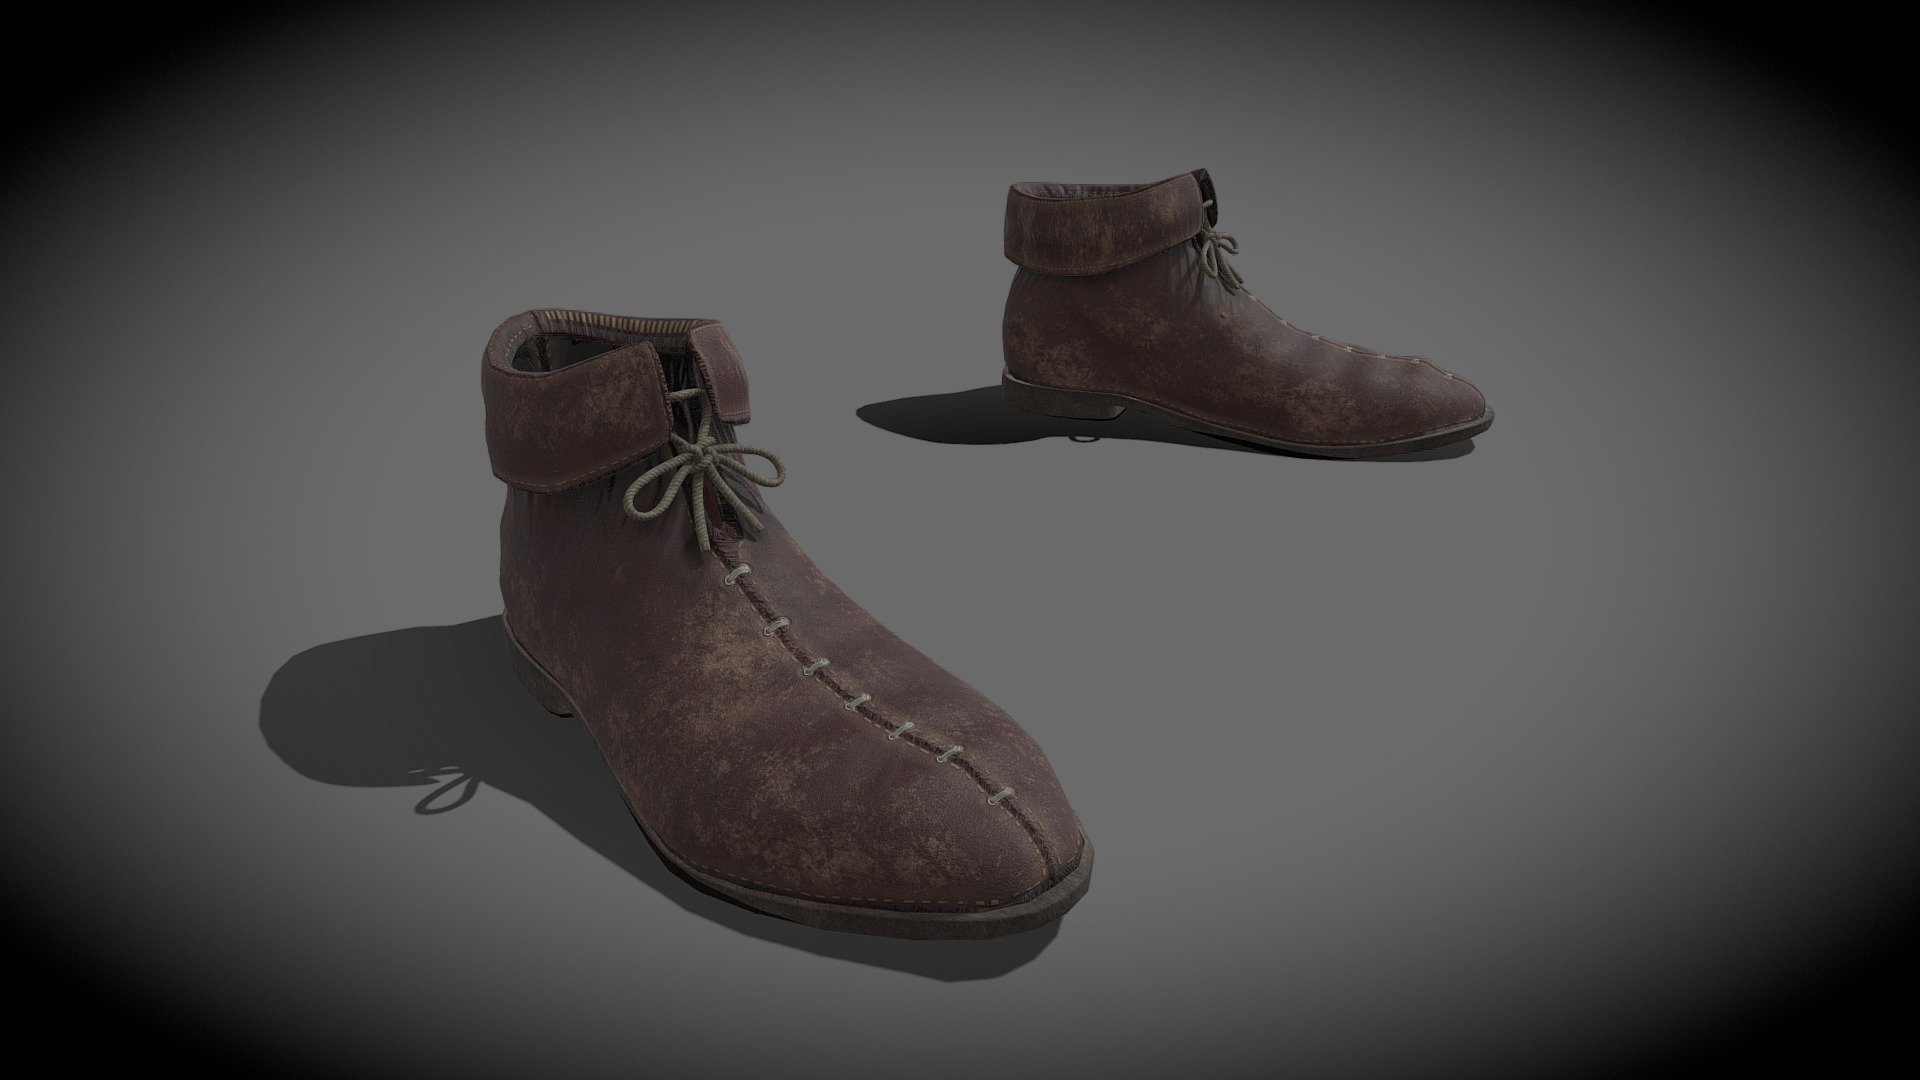 Medieval Style leather shoes.
Created in Blender and painted in Substance Painter 3d model